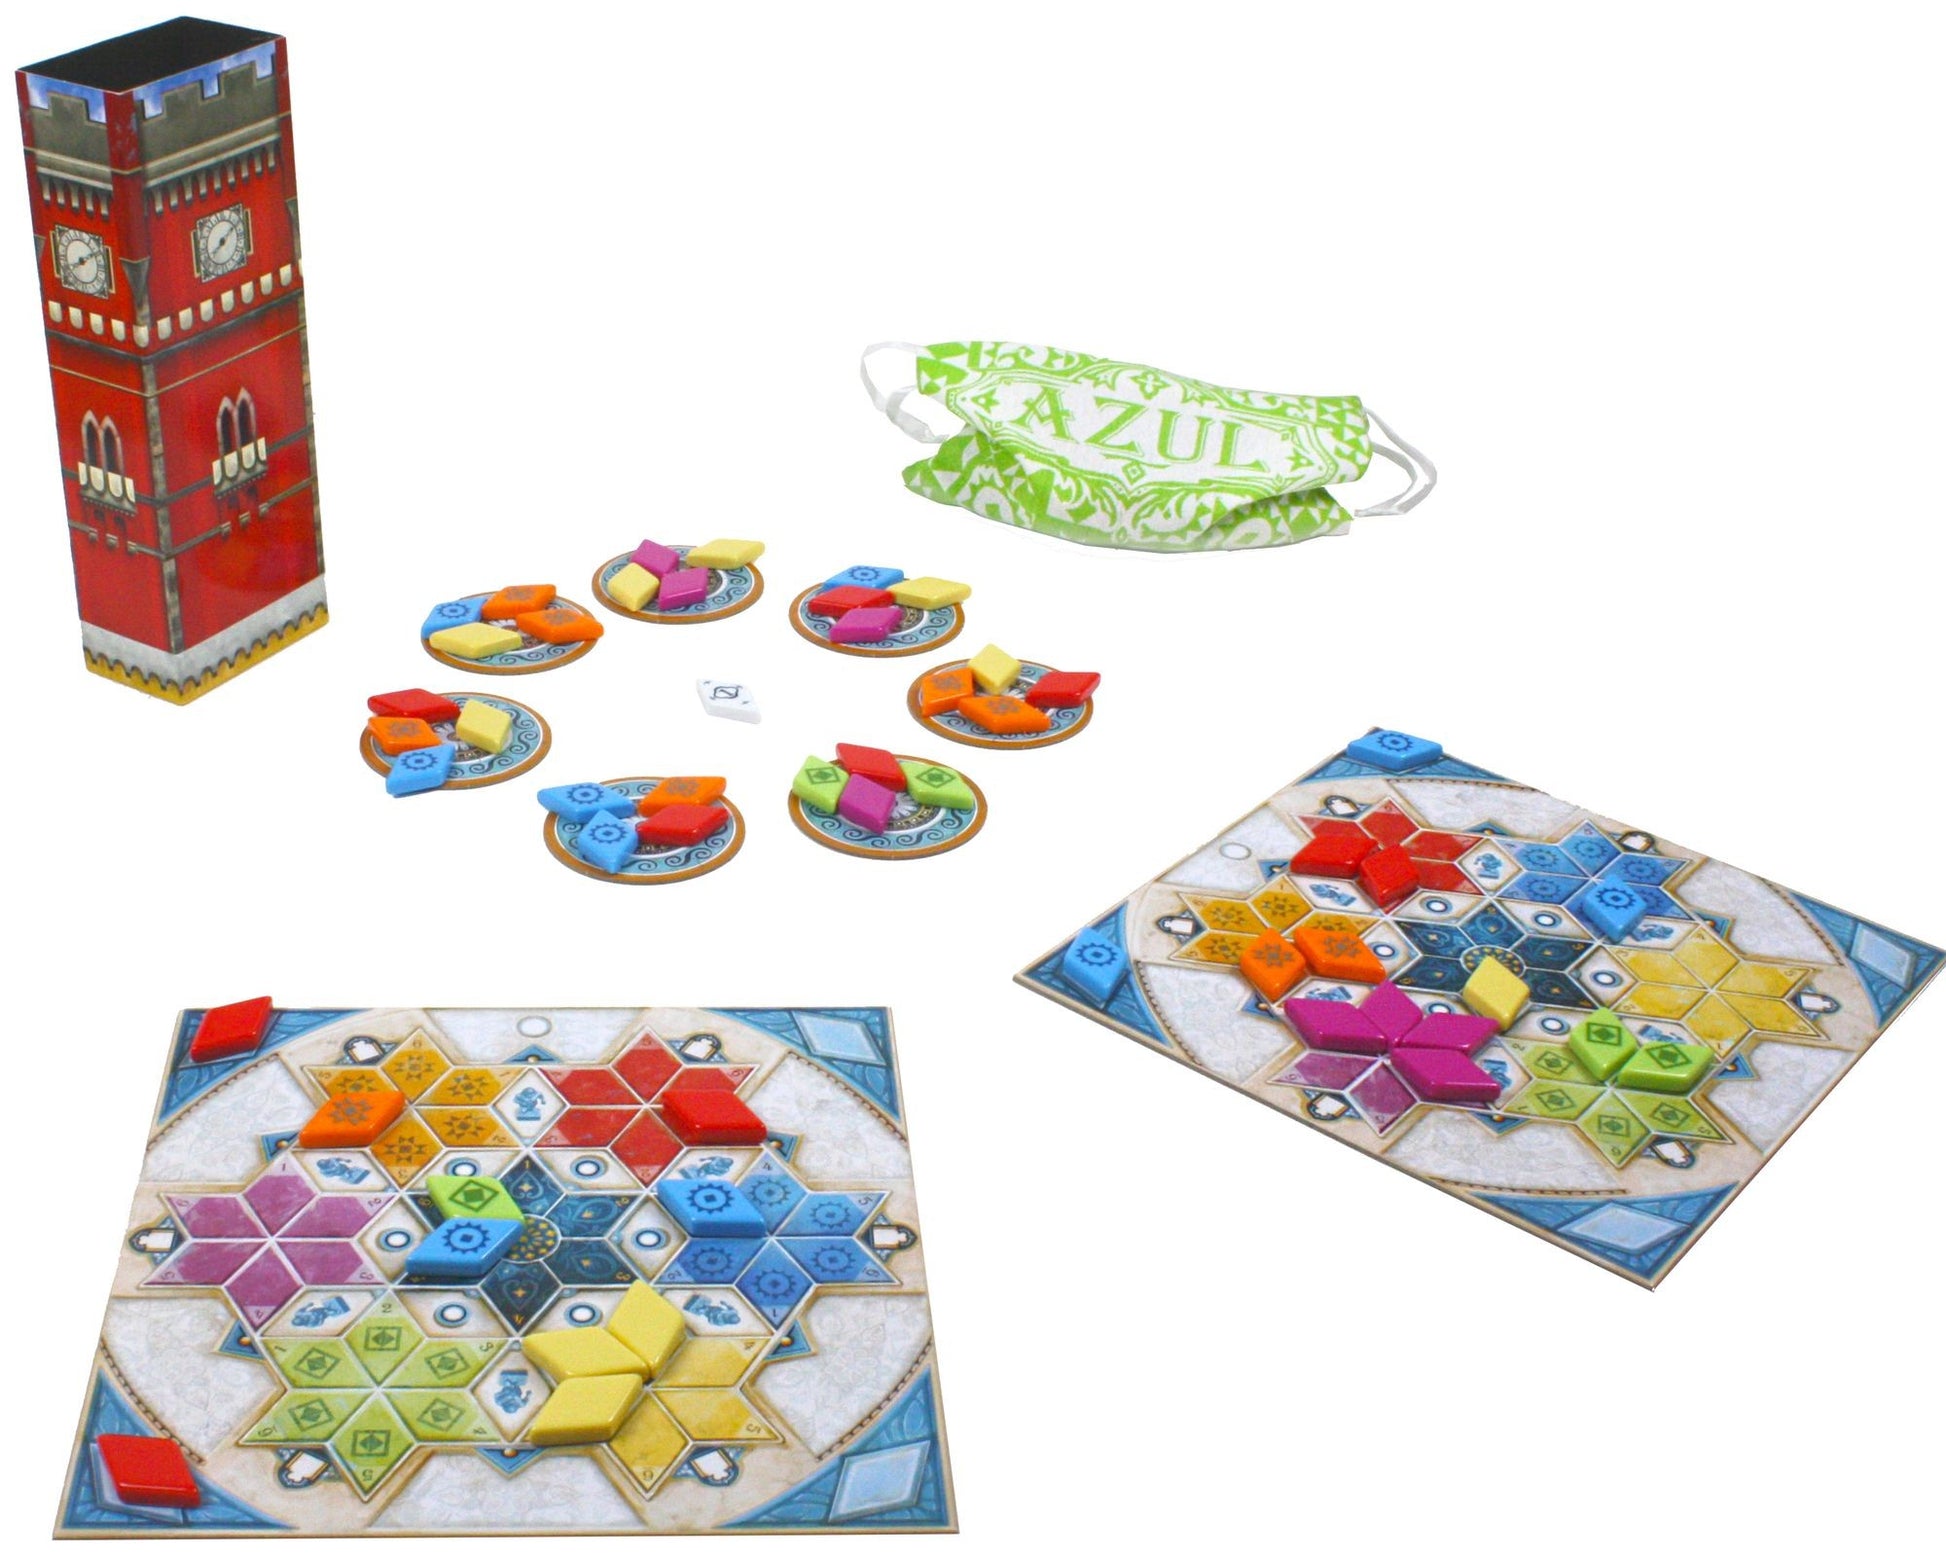 Buy Azul Stained Glass of Sintra Board Game Online at Low Prices